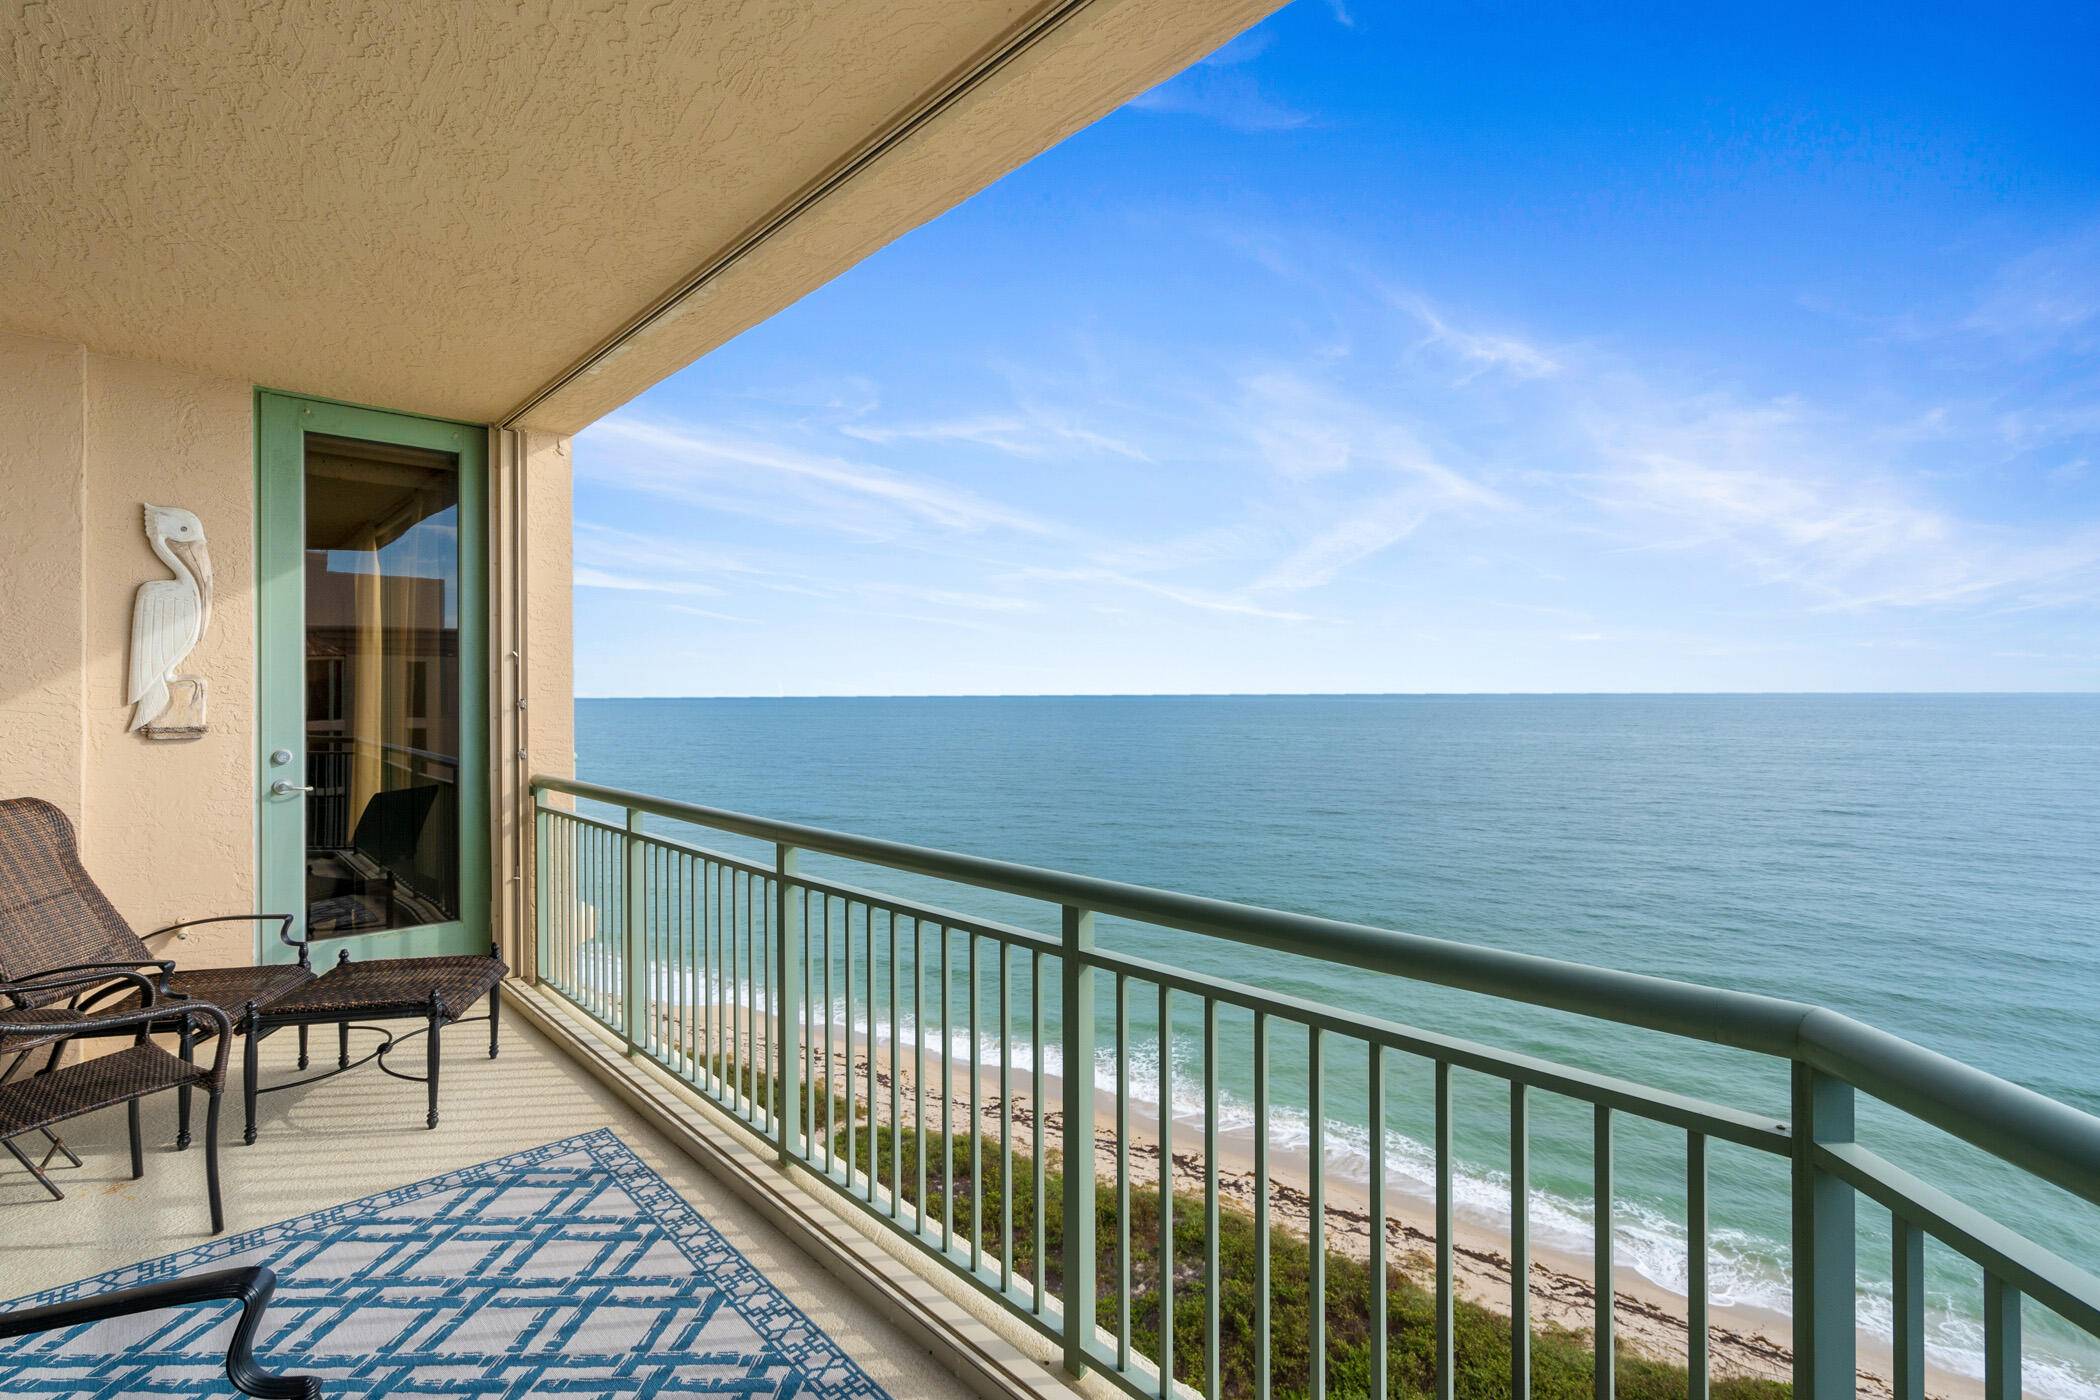 Breathtaking panoramic views of the Atlantic Ocean and the Indian River in this beautiful penthouse unit located in Altamira.